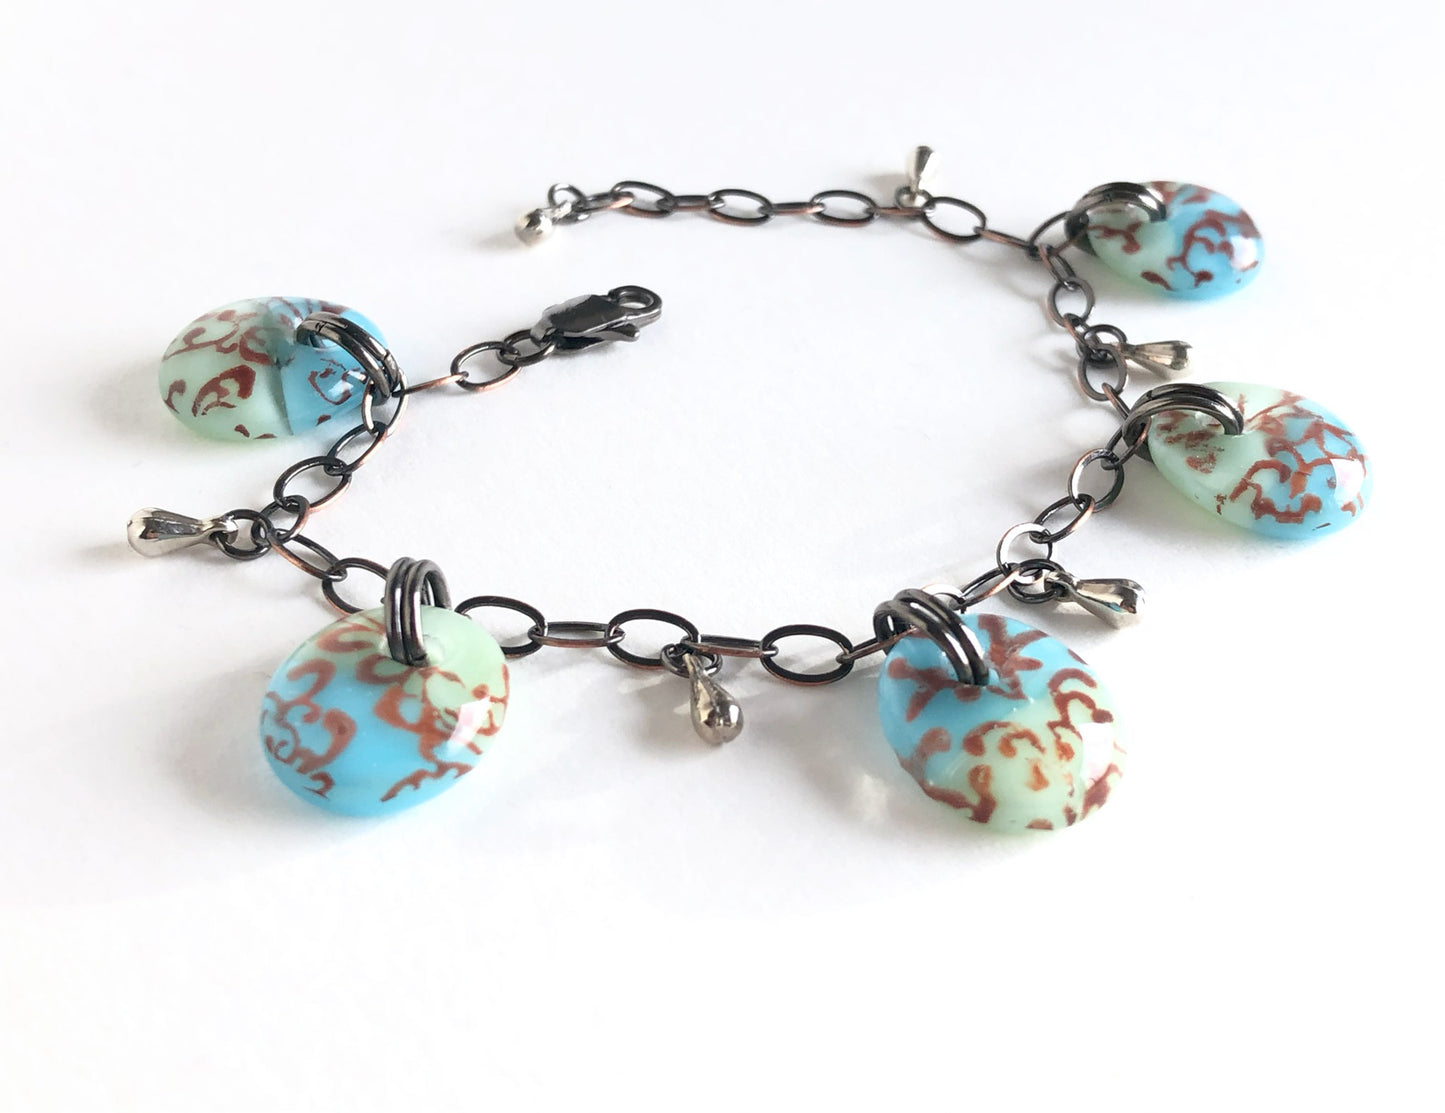 One of a kind adjustable fused glass bracelet with antiqued bronze chain and stainless steel tear drop beads.